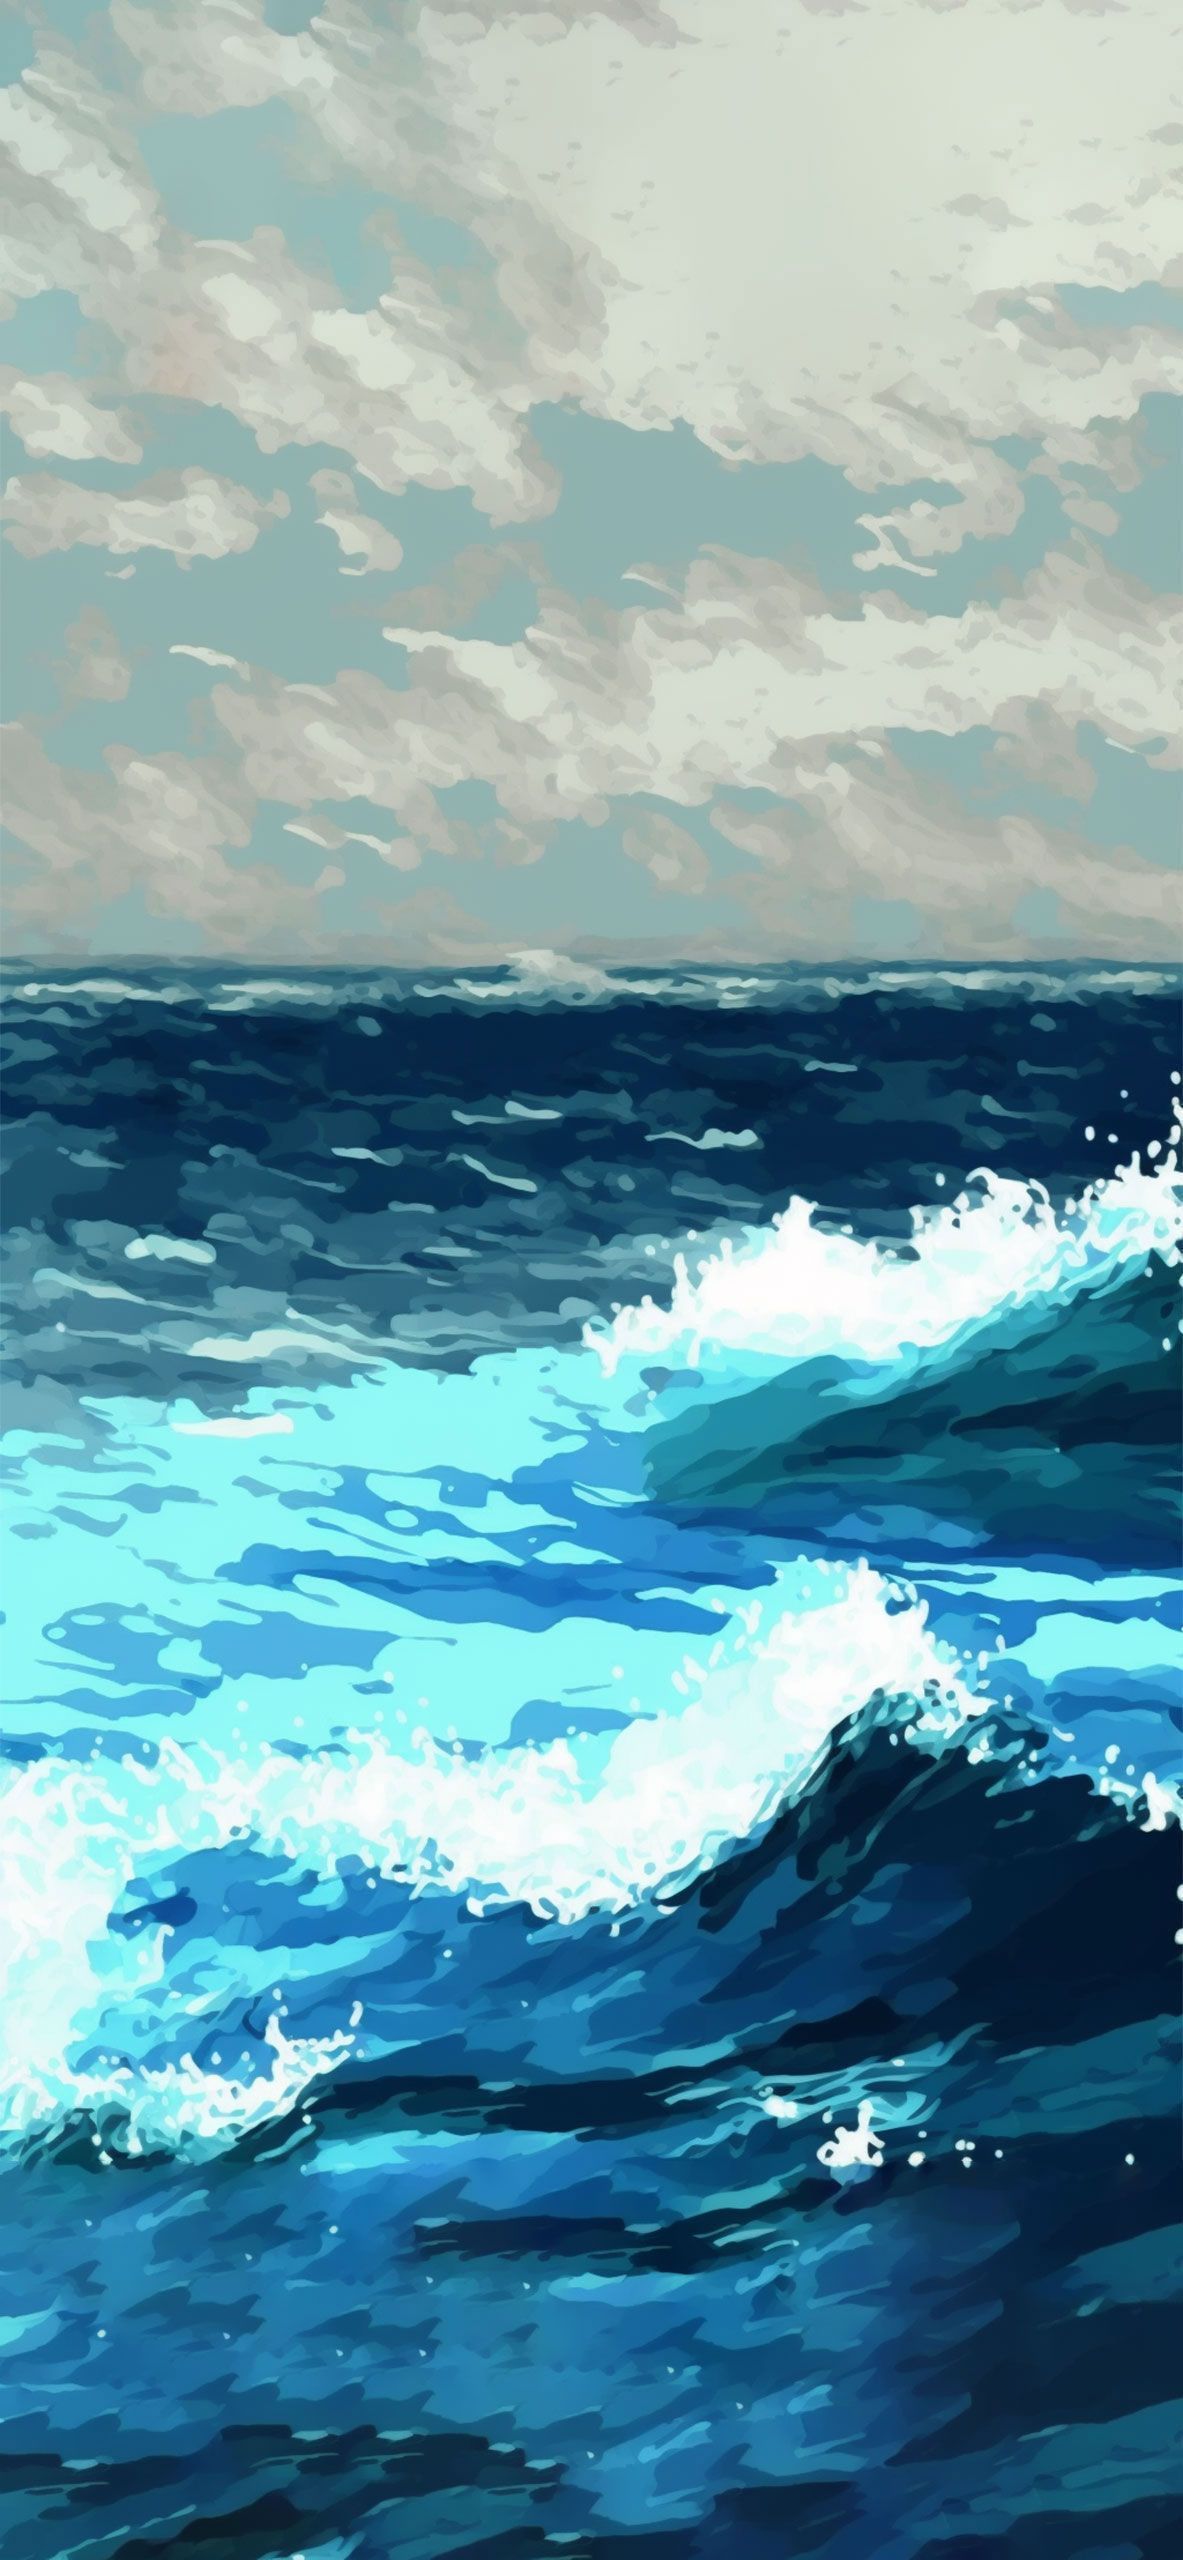 Painting of a blue sea - Ocean, wave, watercolor